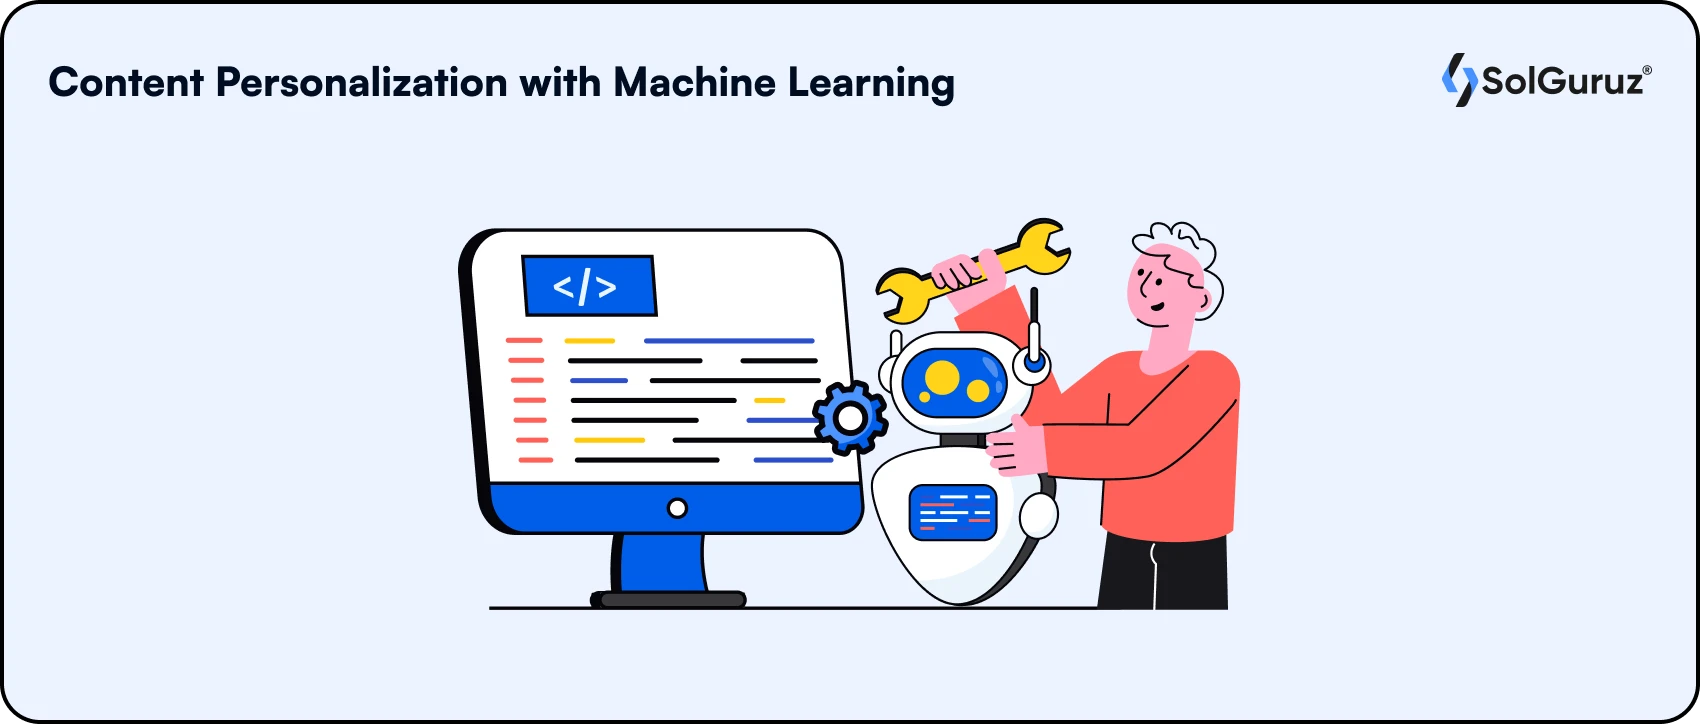 Content Personalization with Machine Learning